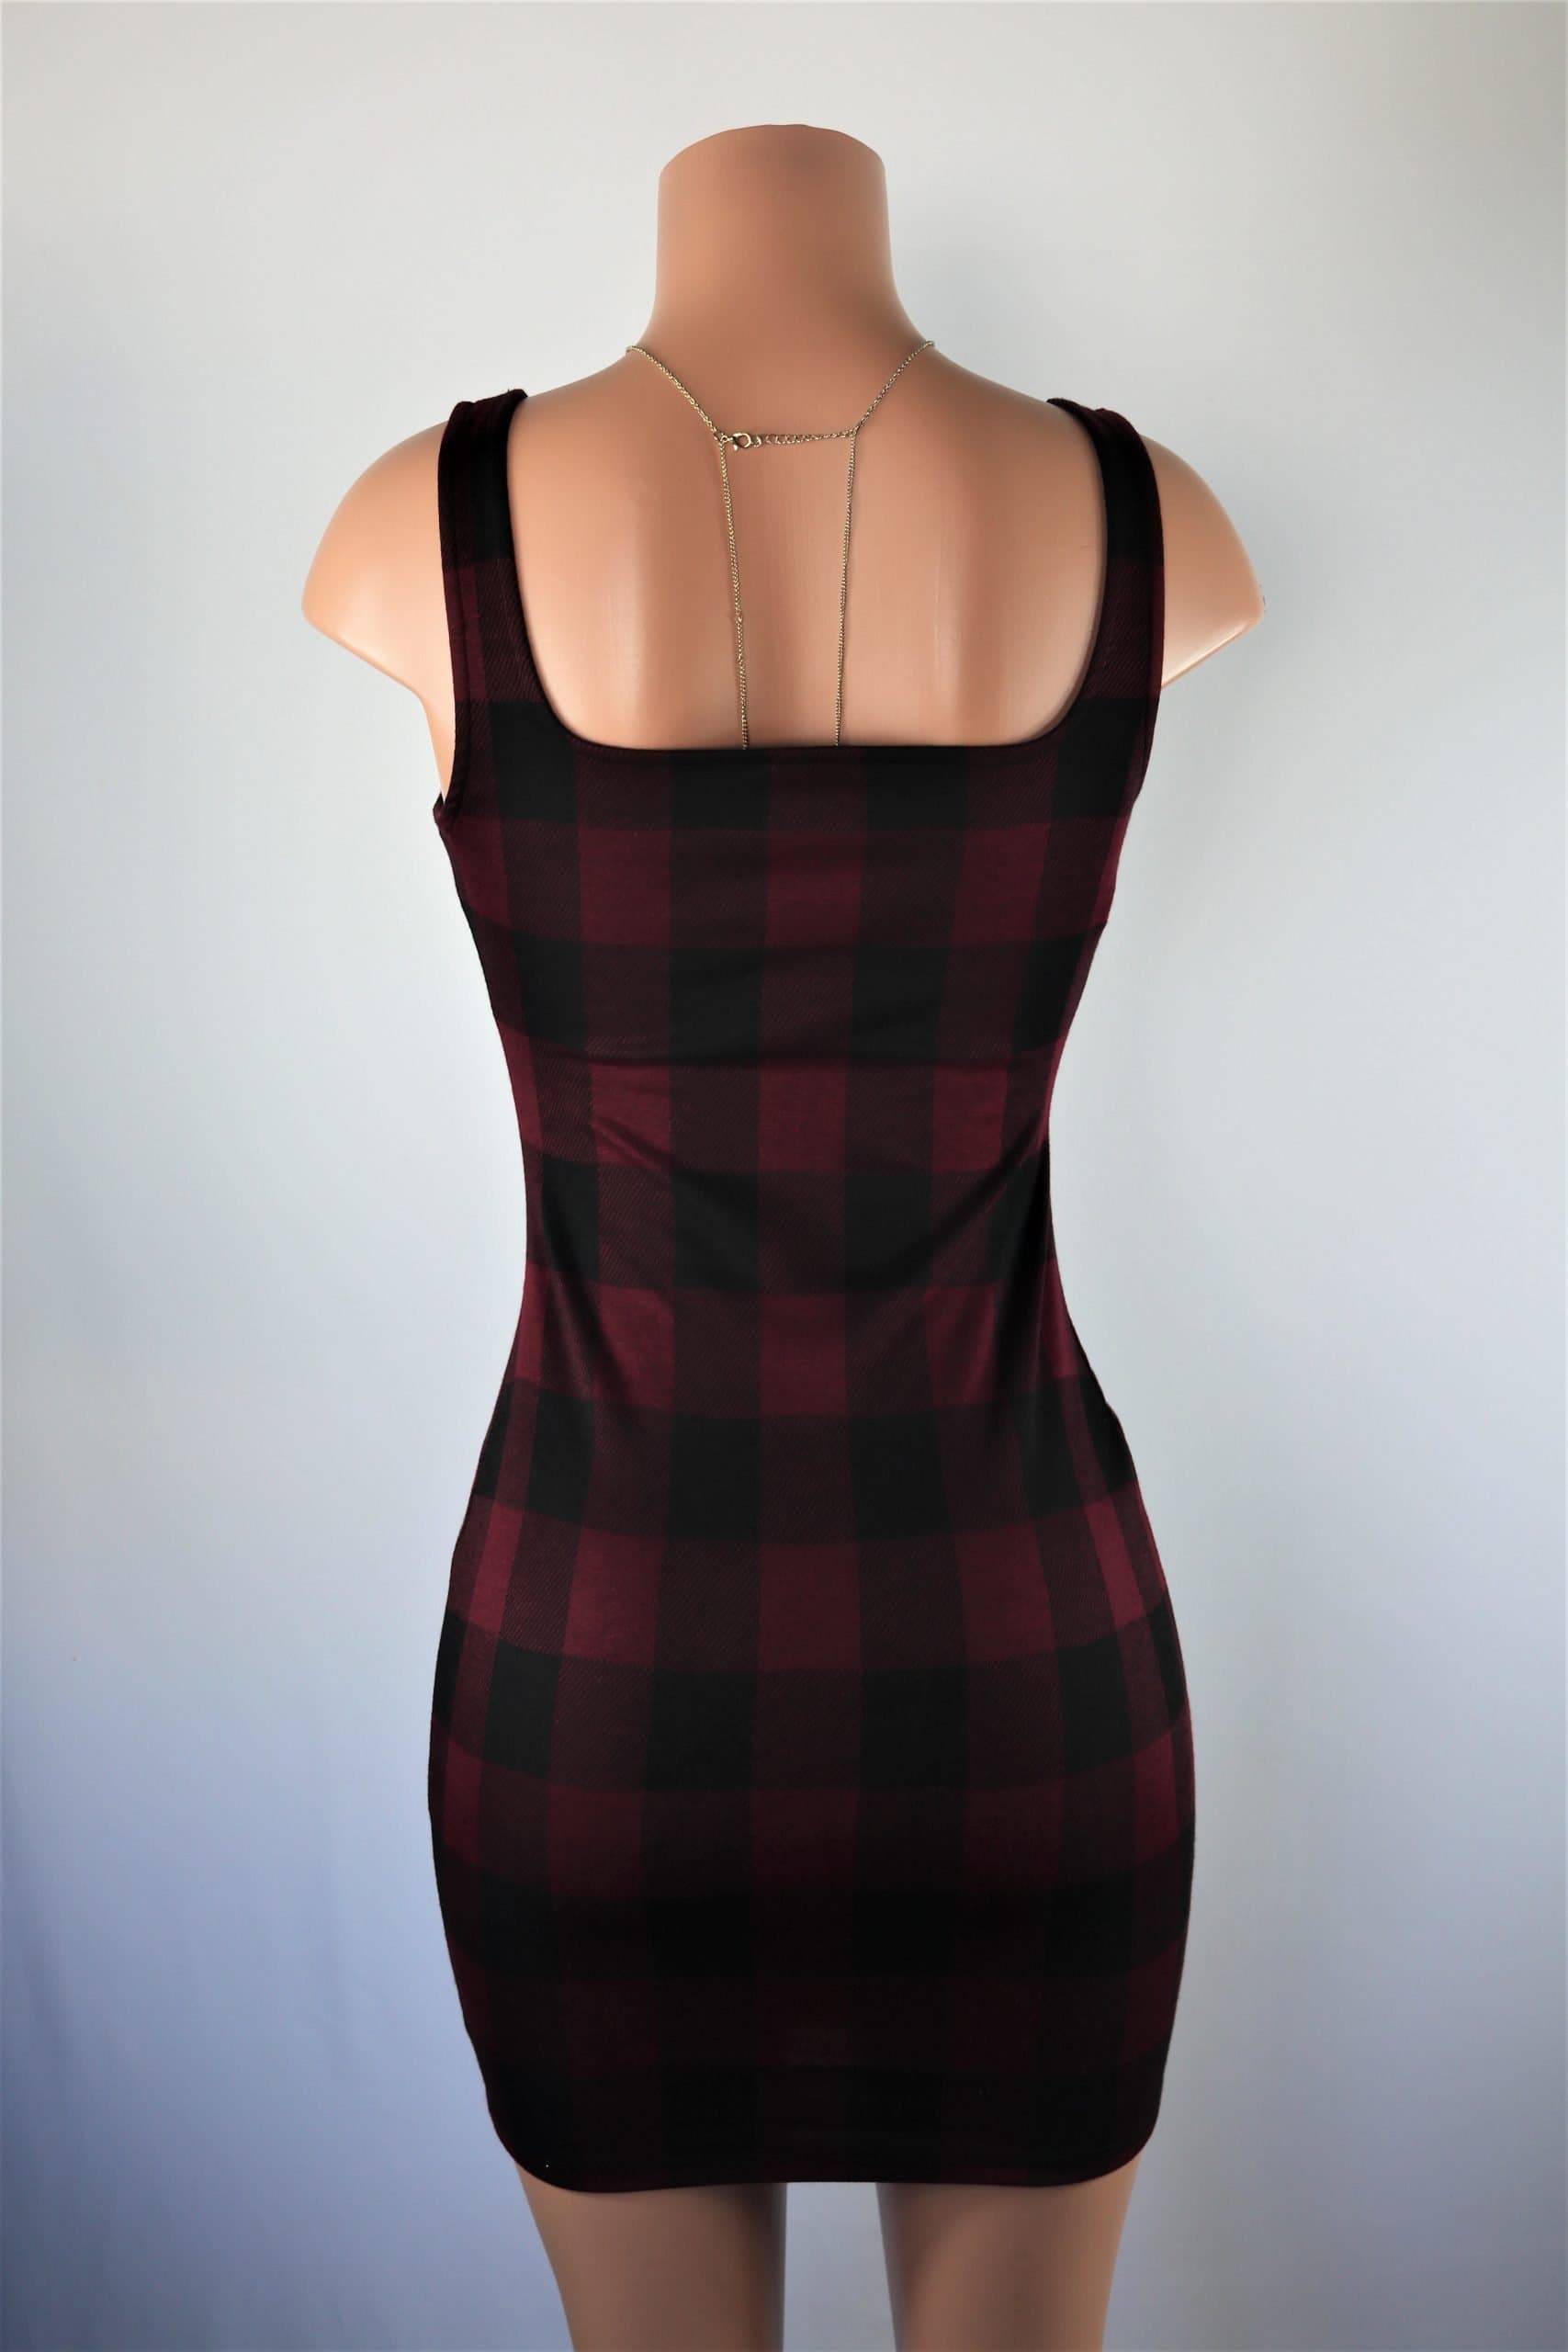 Plaid Dress - Plaid square neck sexy mini dress in Blue and Red.